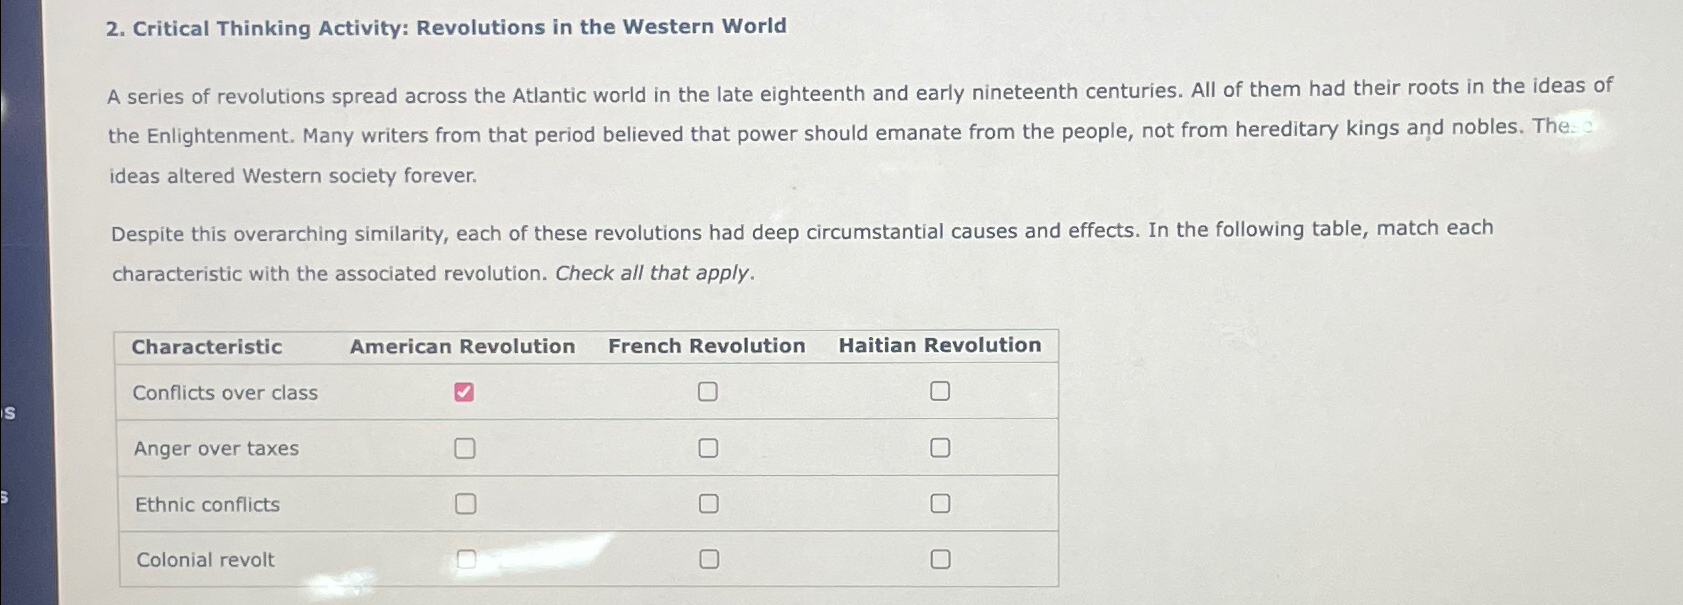 critical thinking questions about revolutions